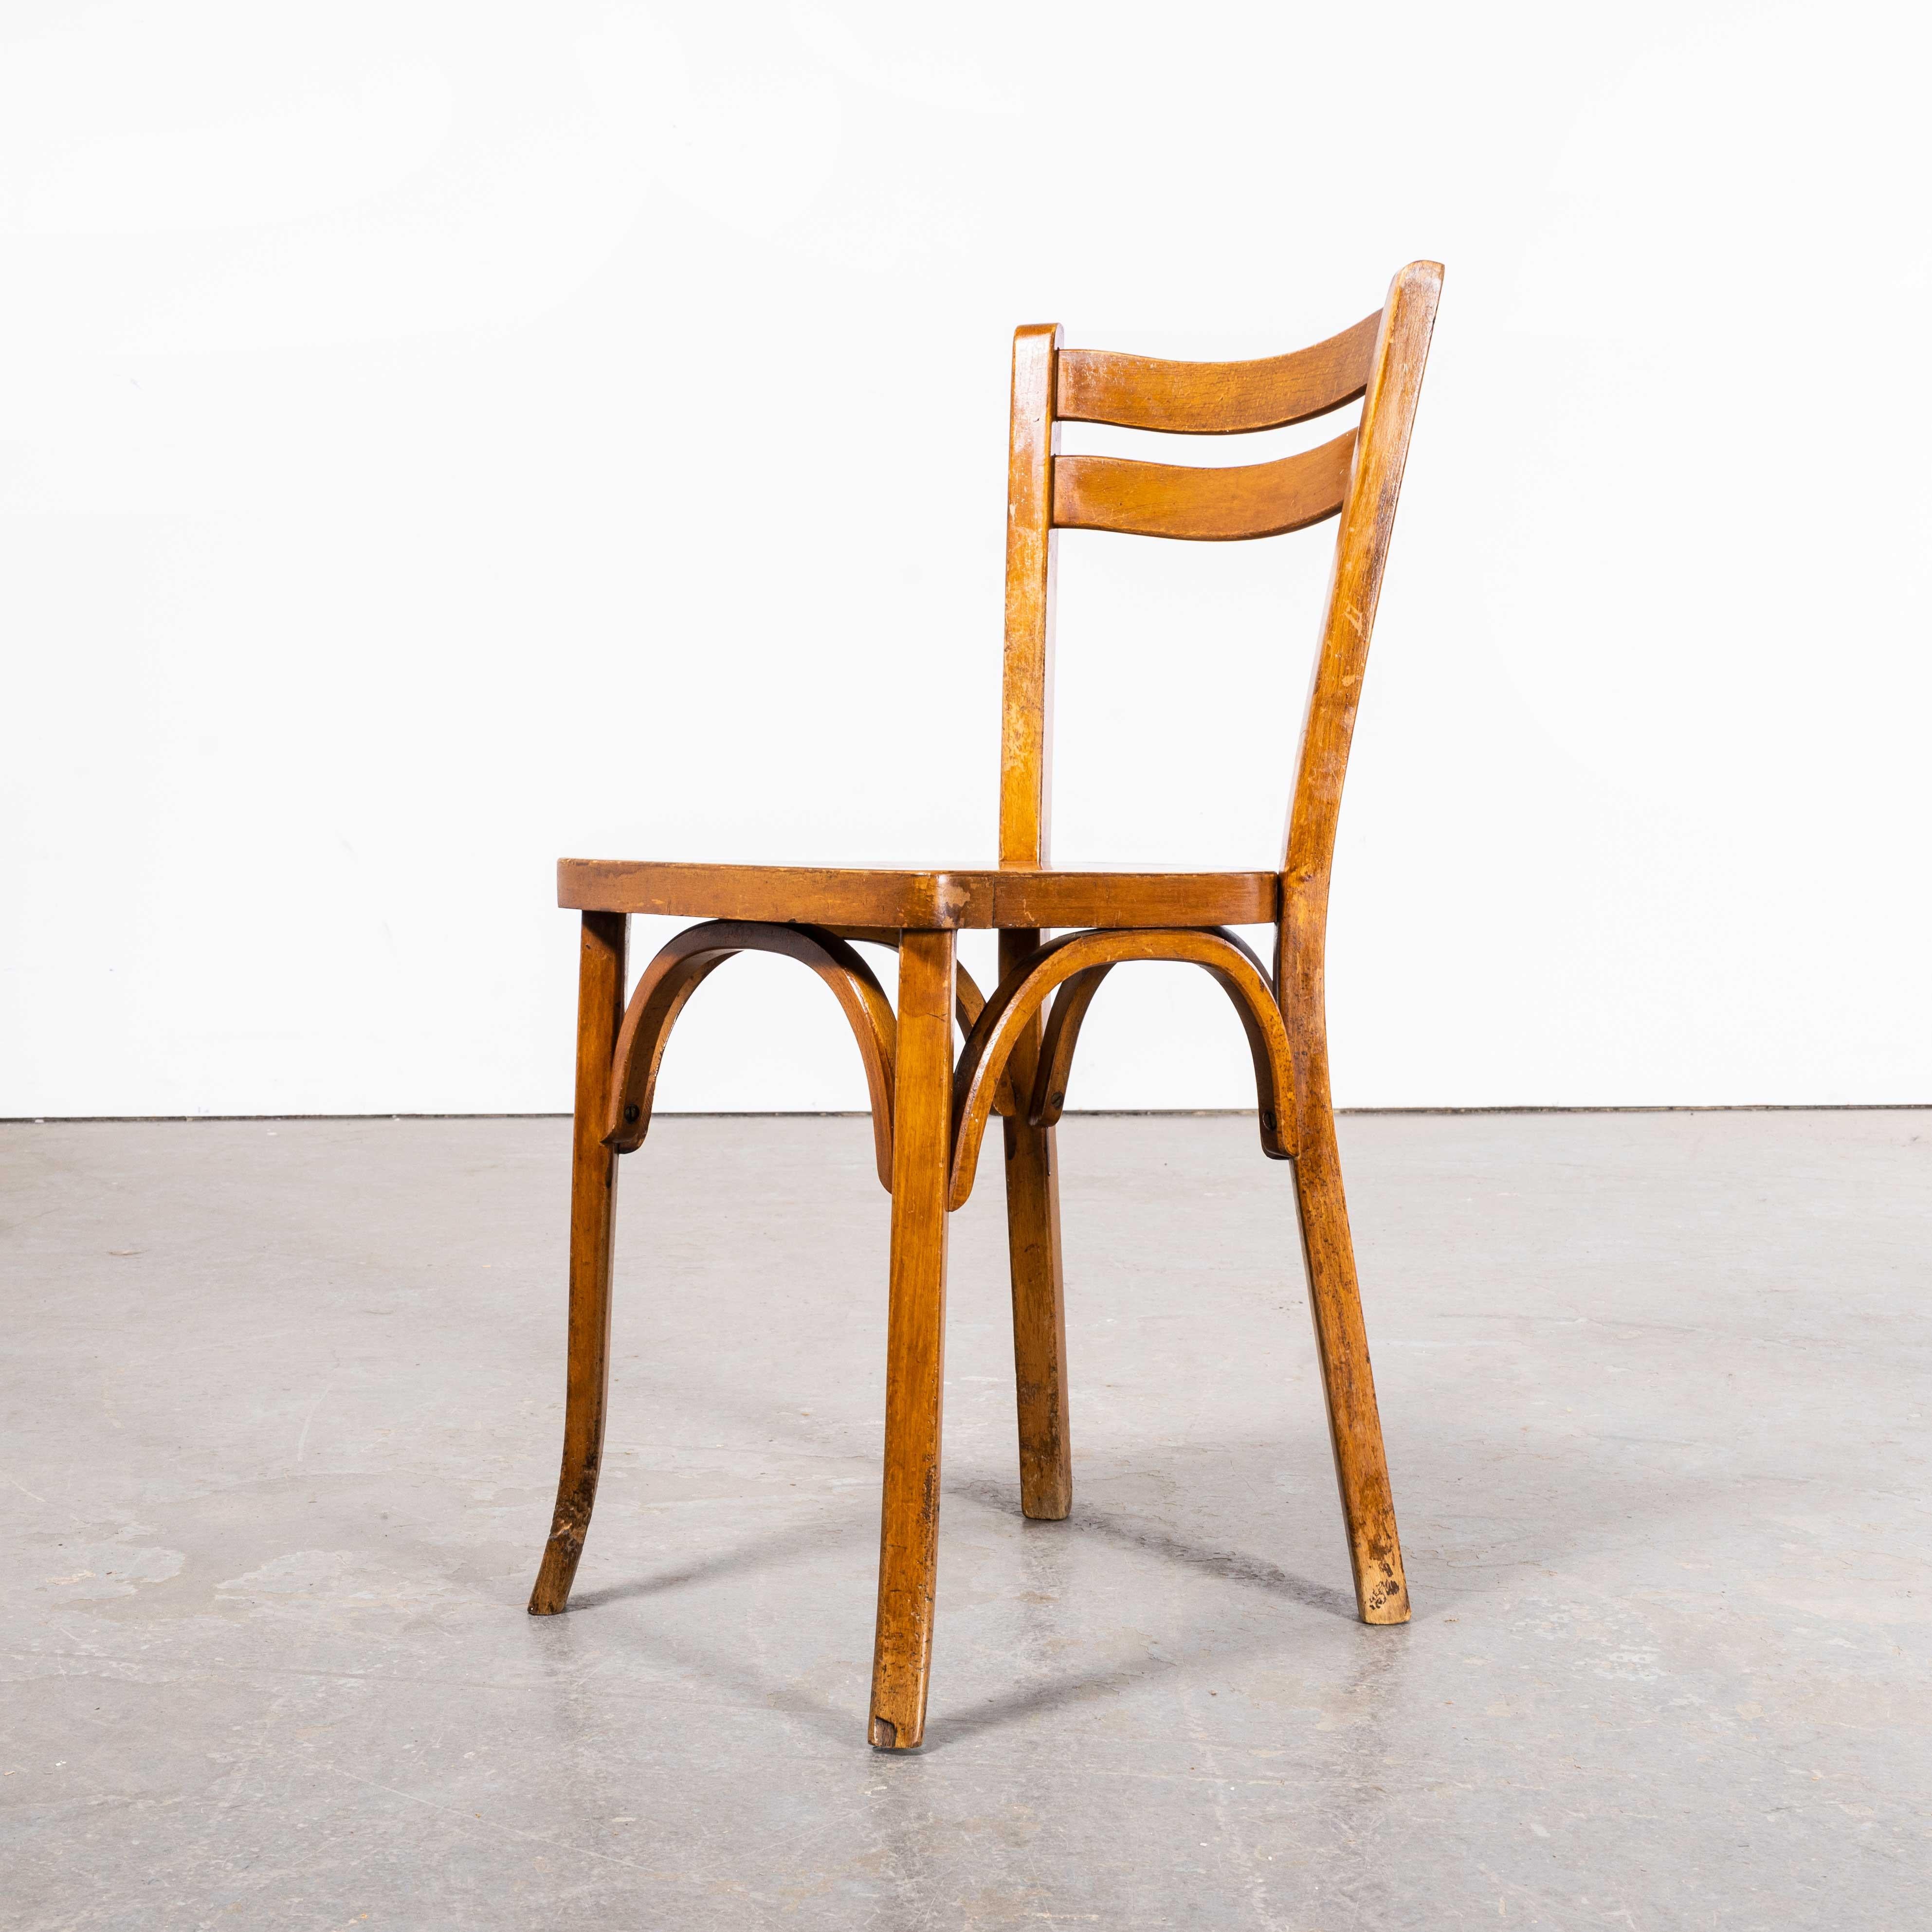 1950’s French Baumann Wavy Back Bentwood Dining Chairs – Set Of Four
1950’s French Baumann Wavy Back Bentwood Dining Chairs – Set Of Four. Baumann is a slightly off the radar French producer just starting to gain traction in the market. Baumann was